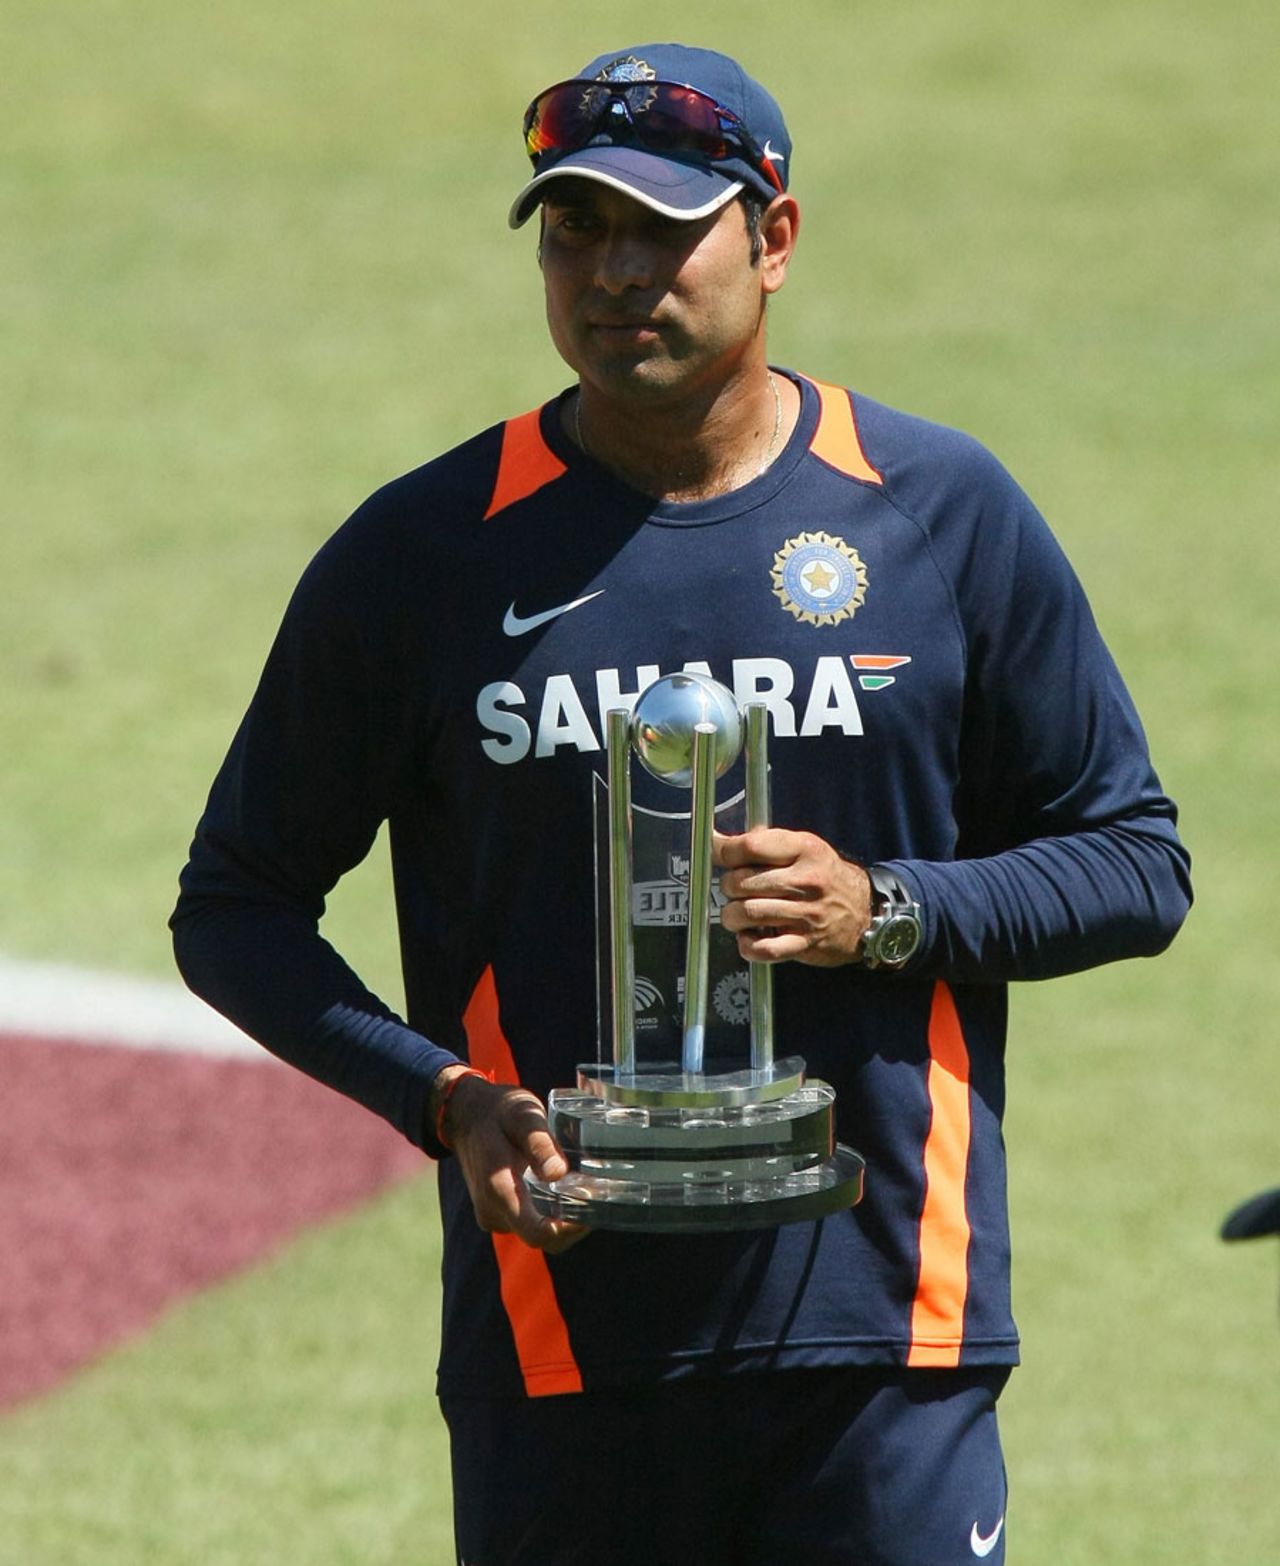 VVS Laxman poses with the Man-of-the-Match trophy, South Africa v India, 2nd Test, Durban, 4th day, December 29, 2010